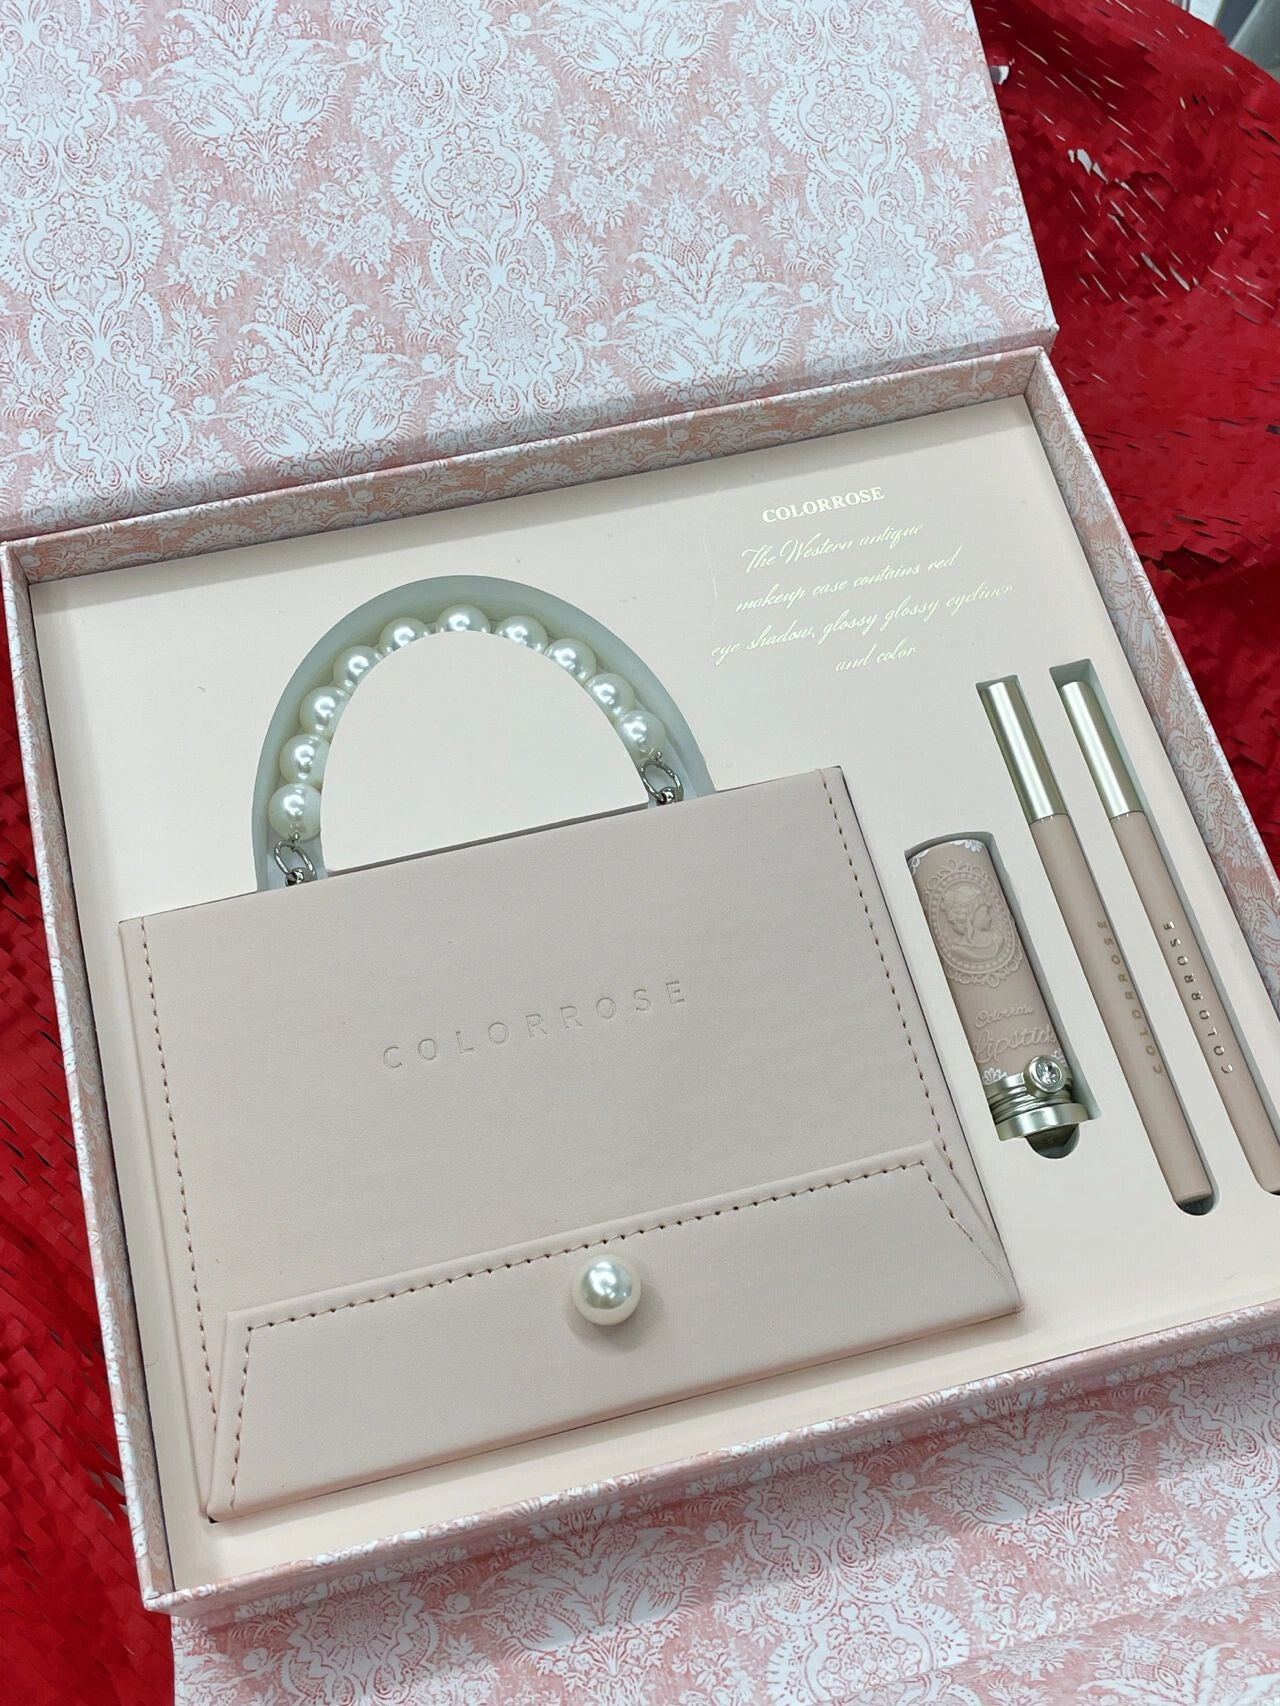 COLORROSE Valentine's Day Limited Edition Gift Set